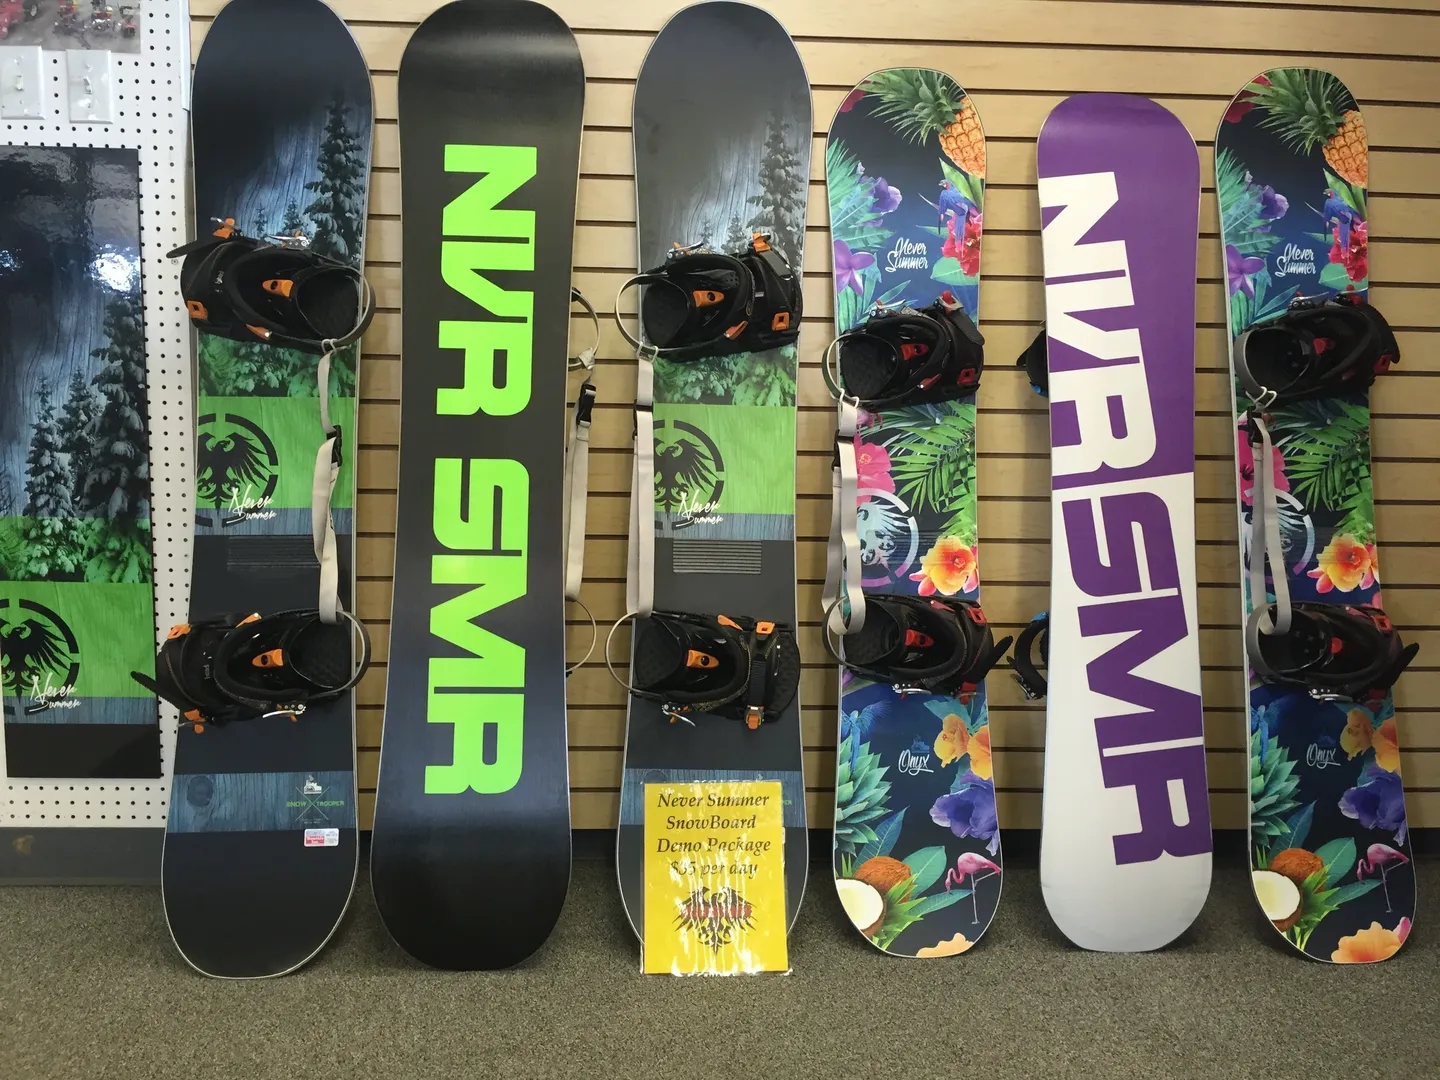 A row of snowboards are lined up against the wall.